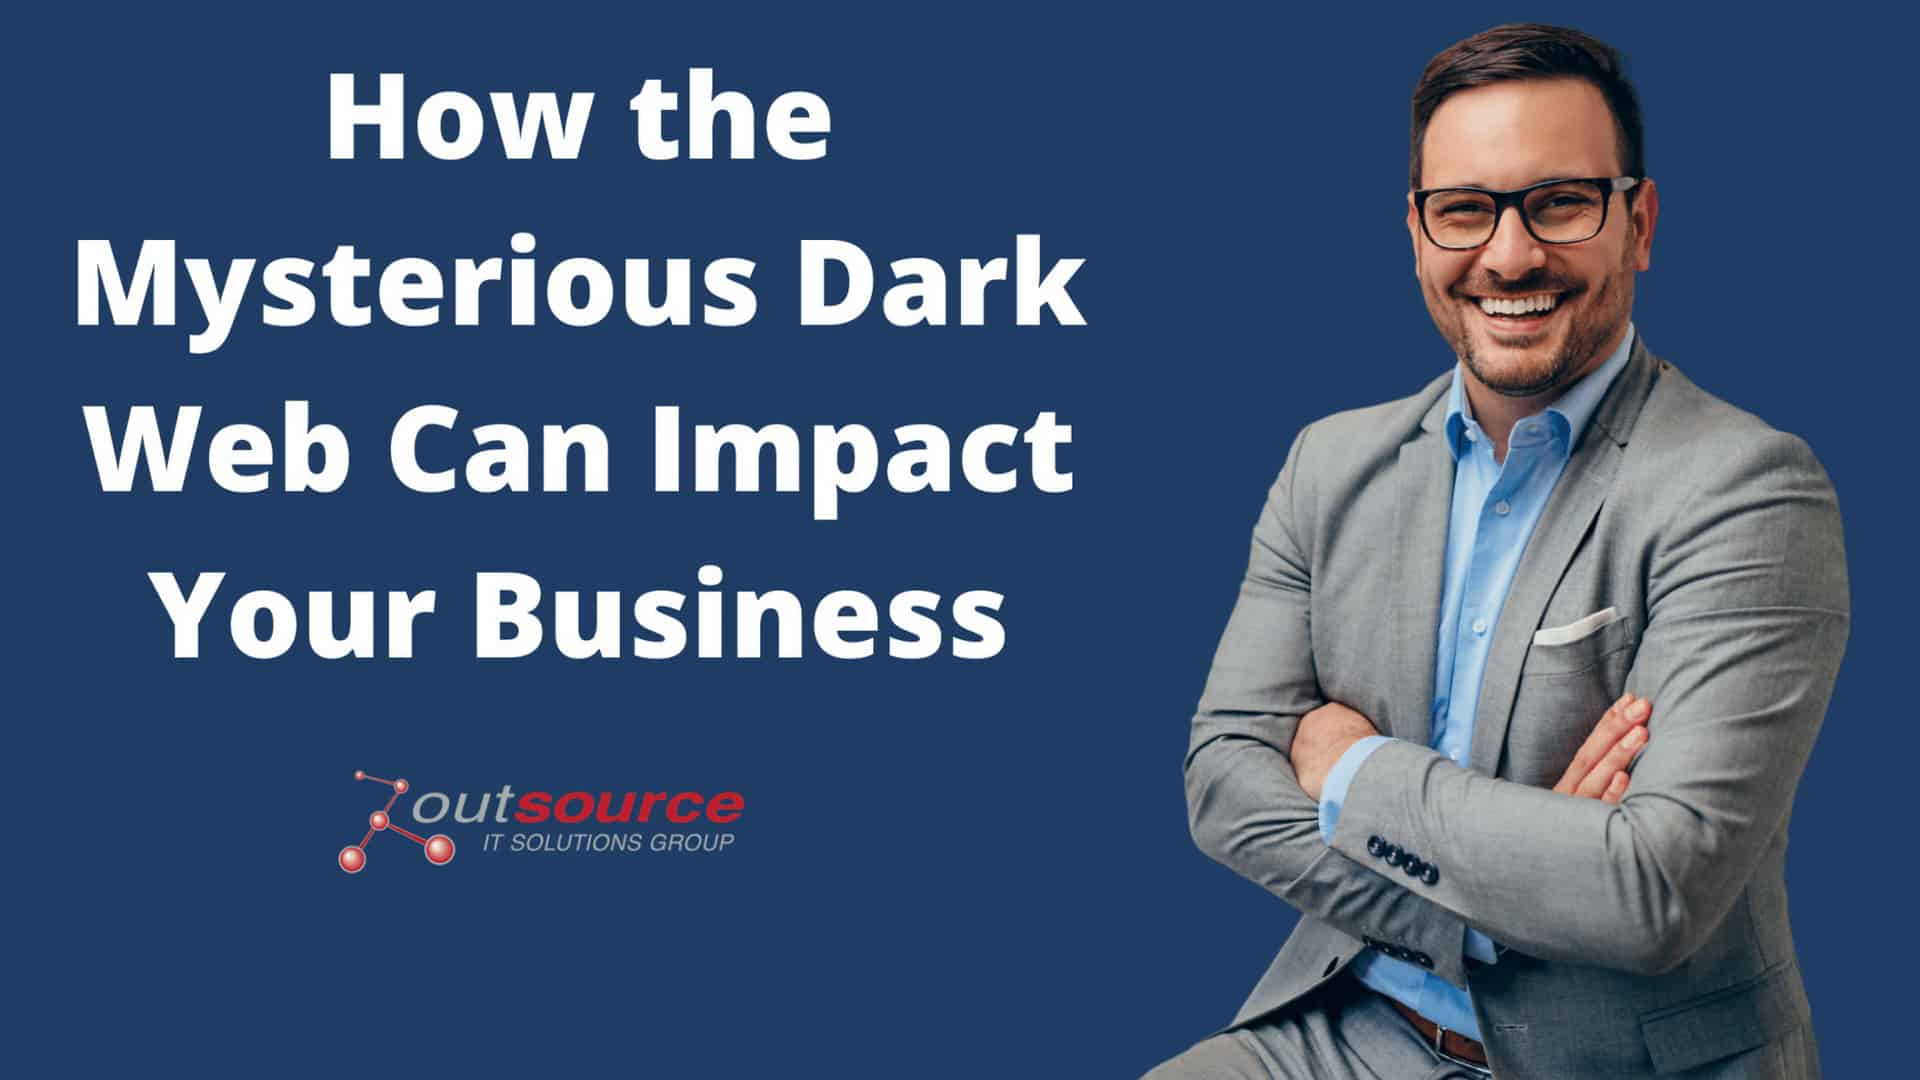 How the Mysterious Dark Web Can Impact Your Business